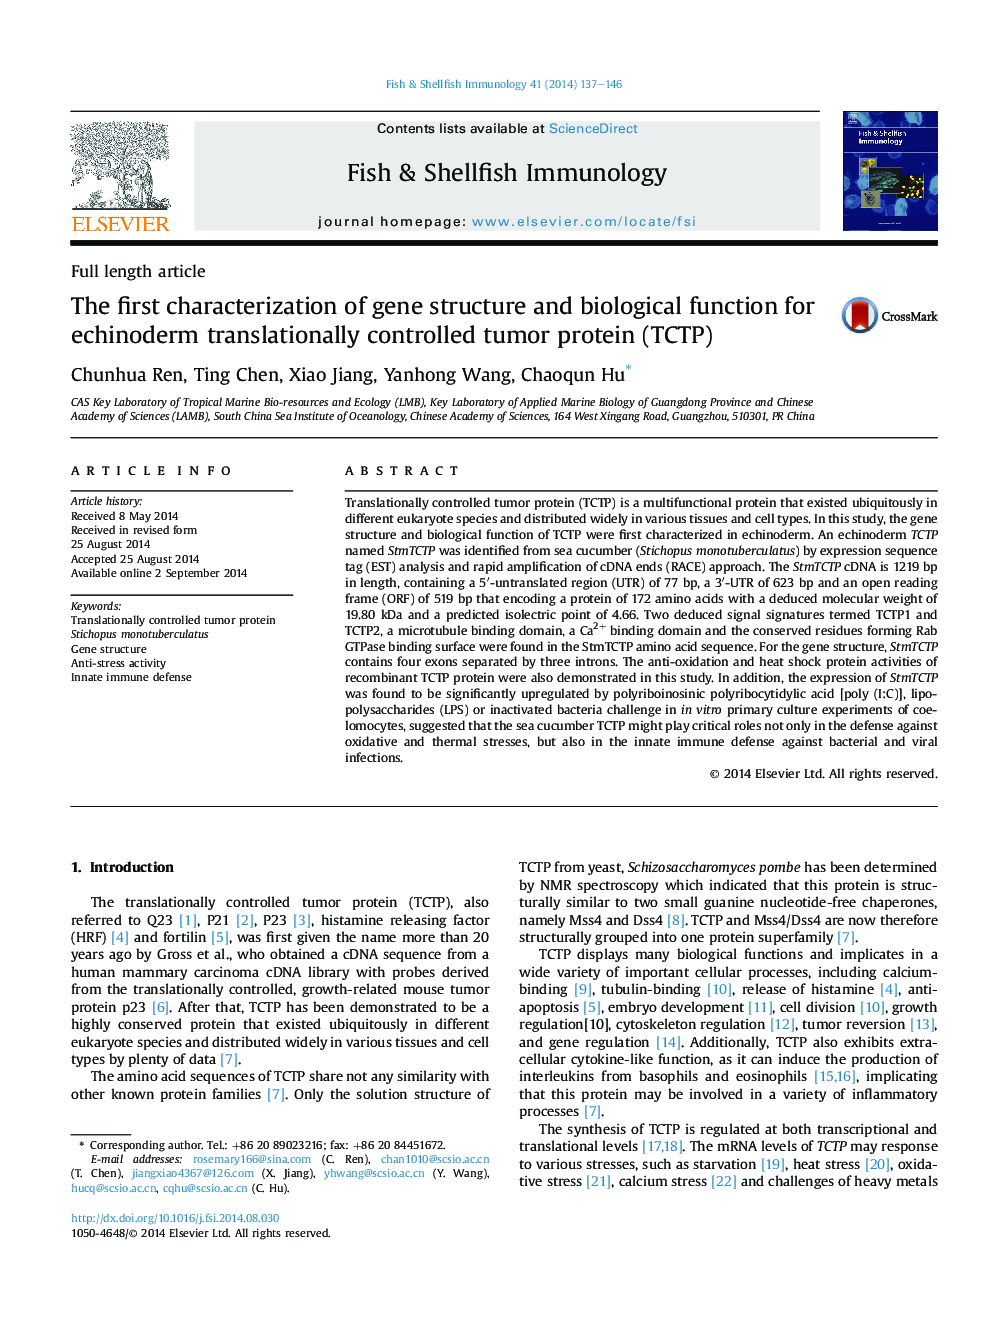 The first characterization of gene structure and biological function for echinoderm translationally controlled tumor protein (TCTP)